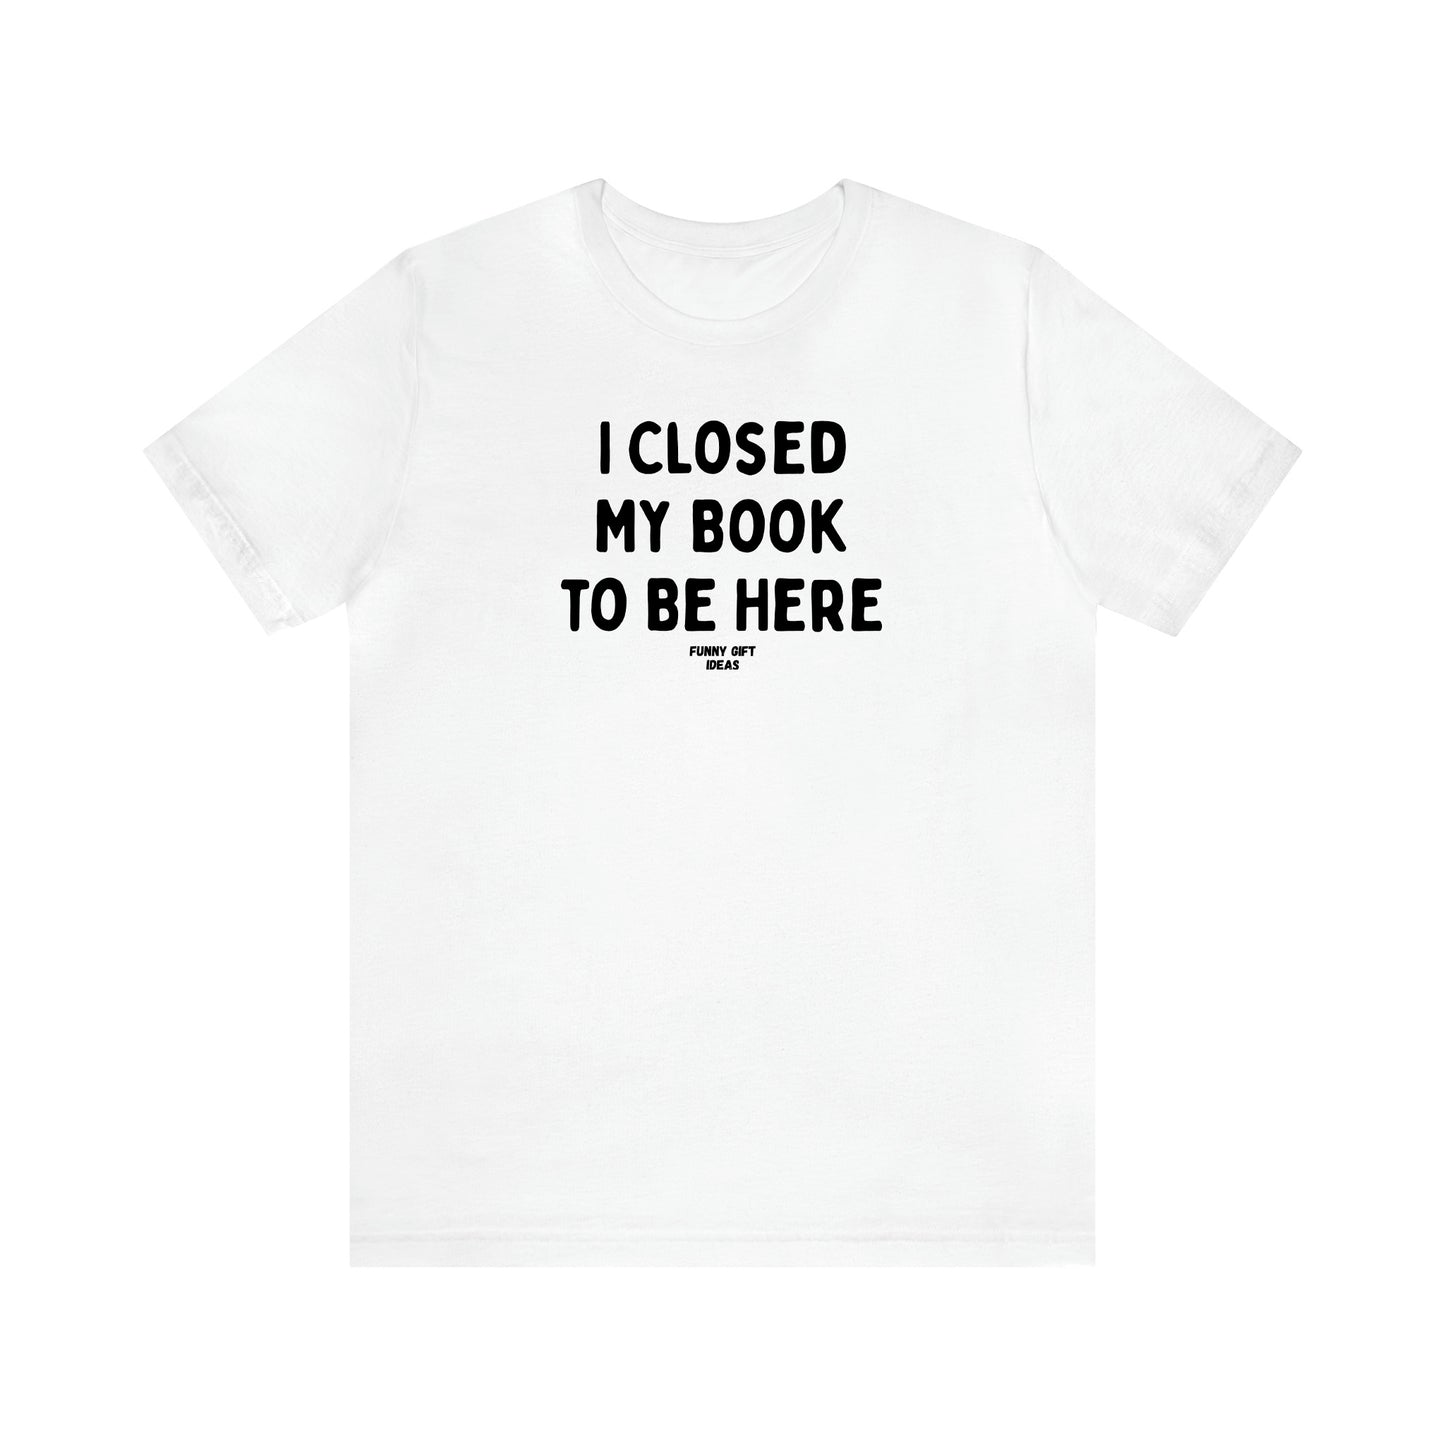 Women's T Shirts I Closed My Book to Be Here - Funny Gift Ideas